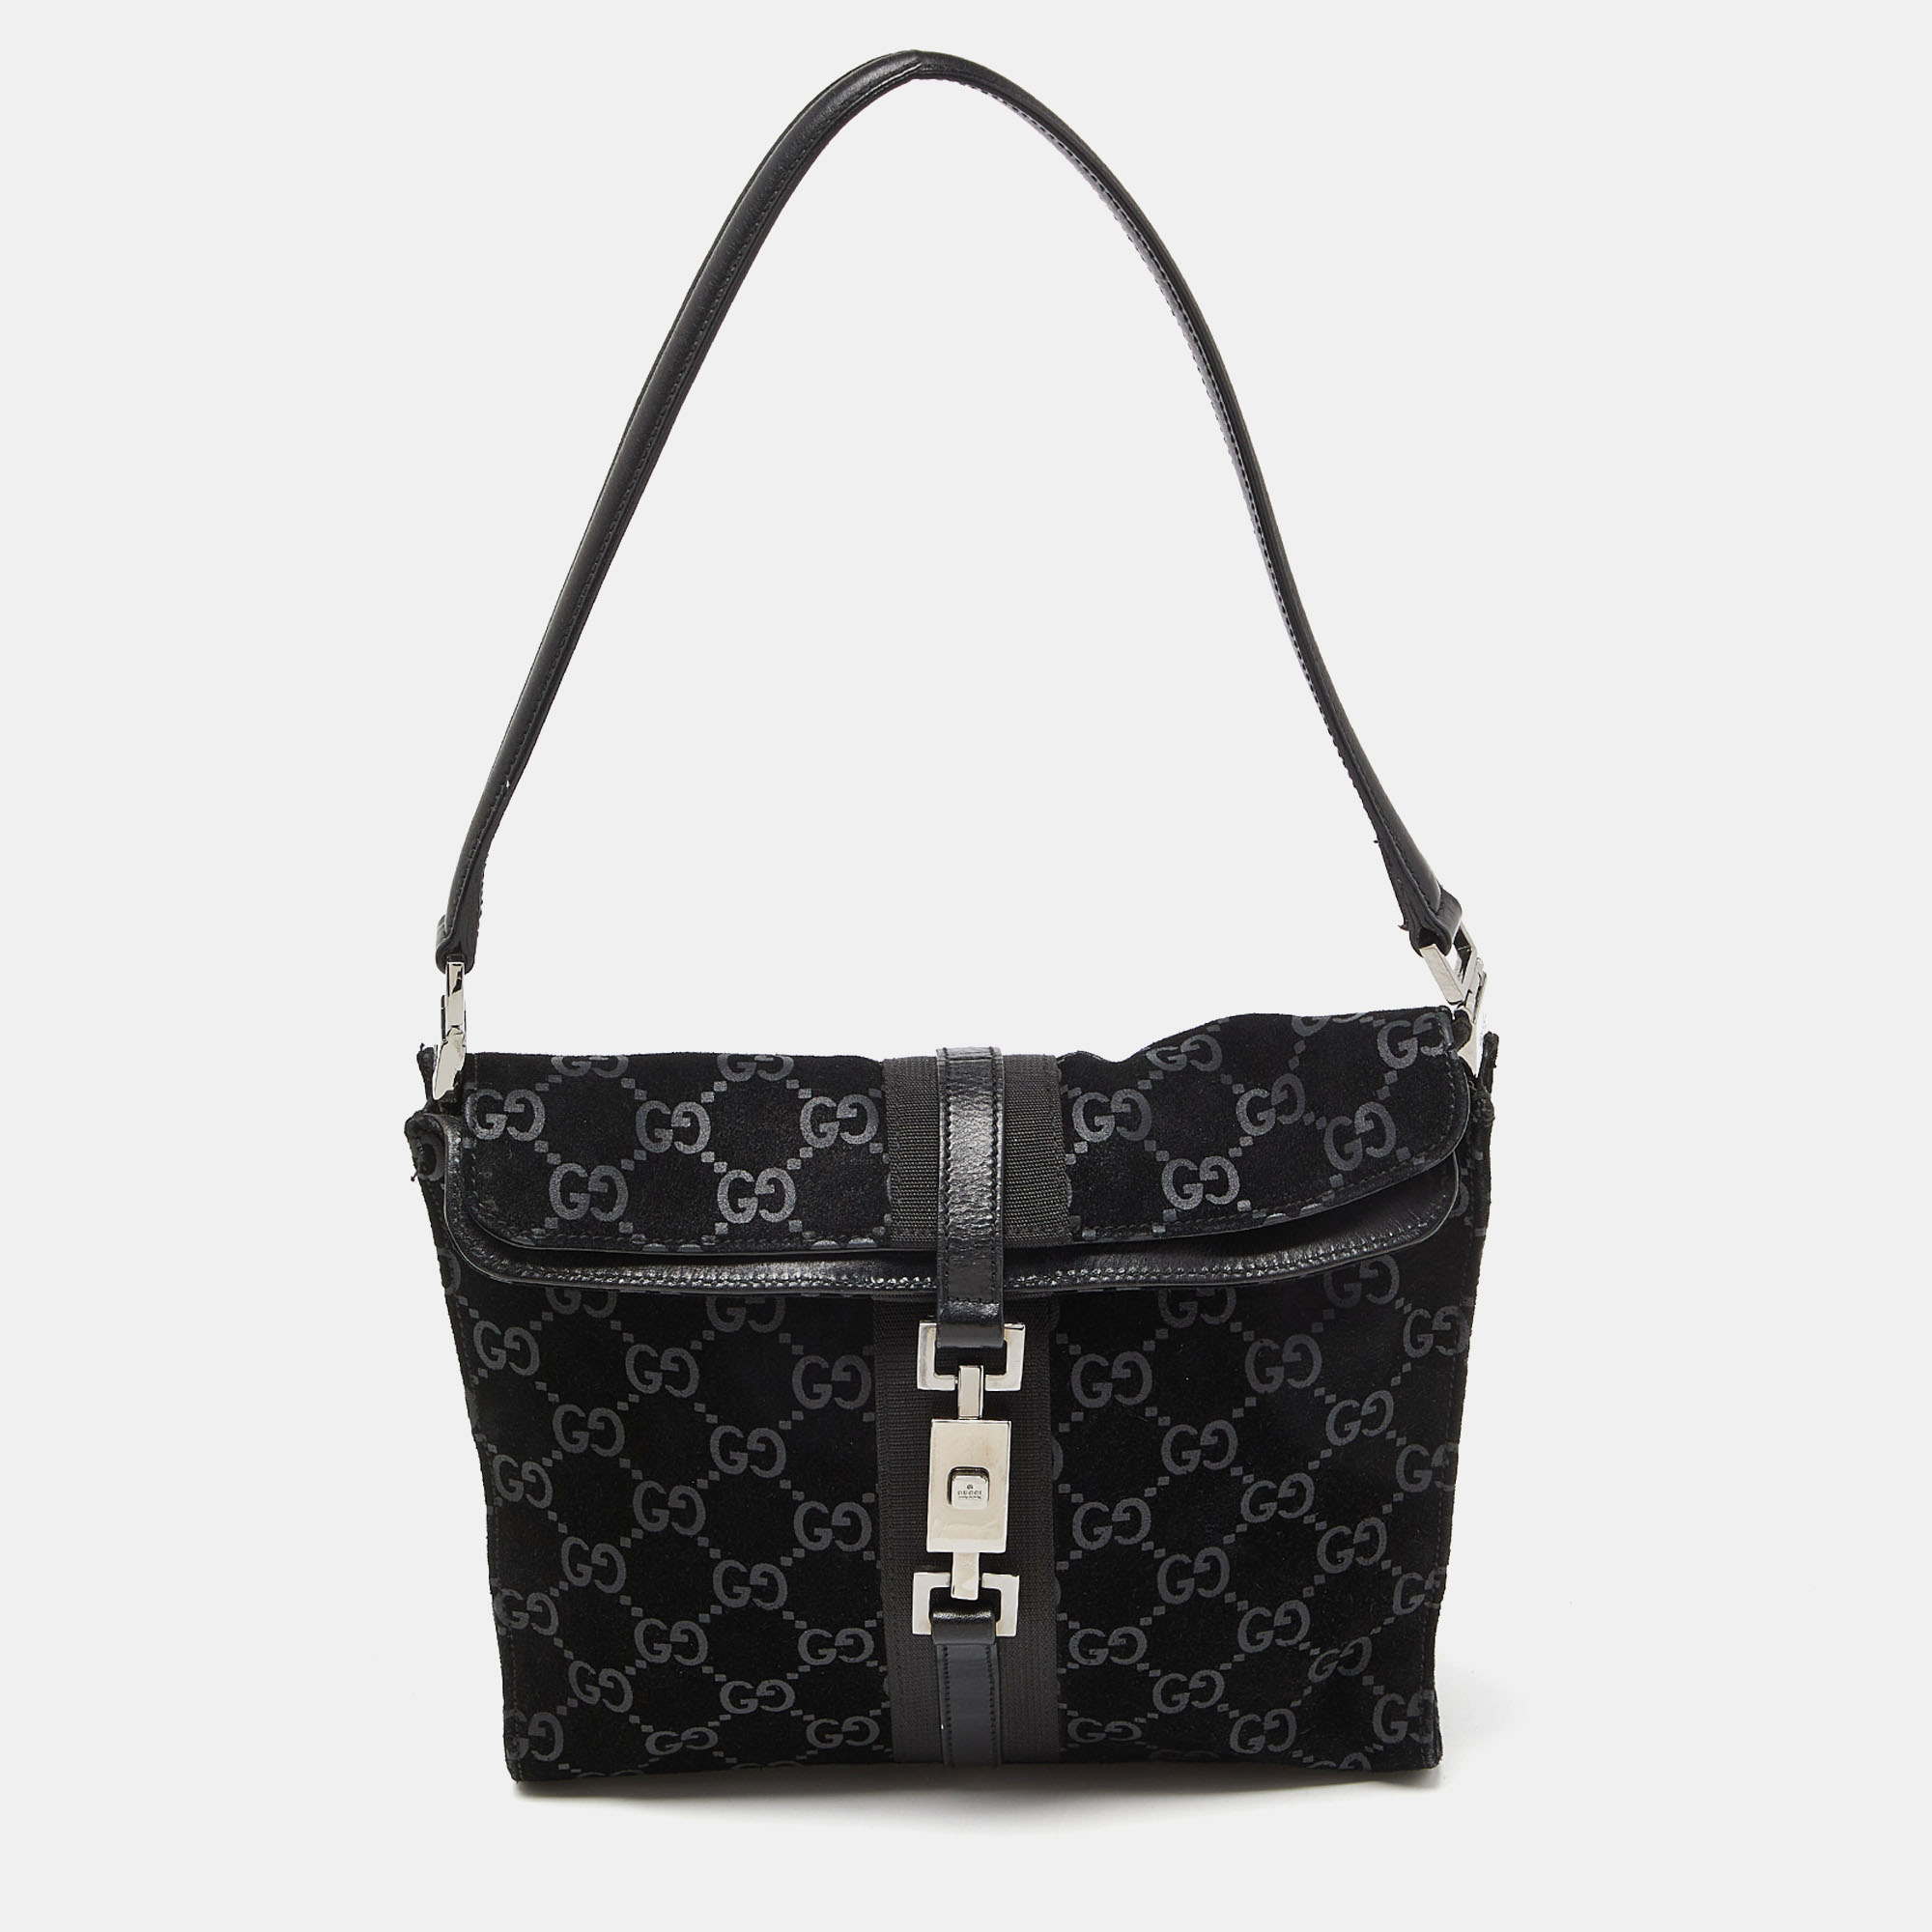 

Gucci Black Suede and Leather Jackie O Bag